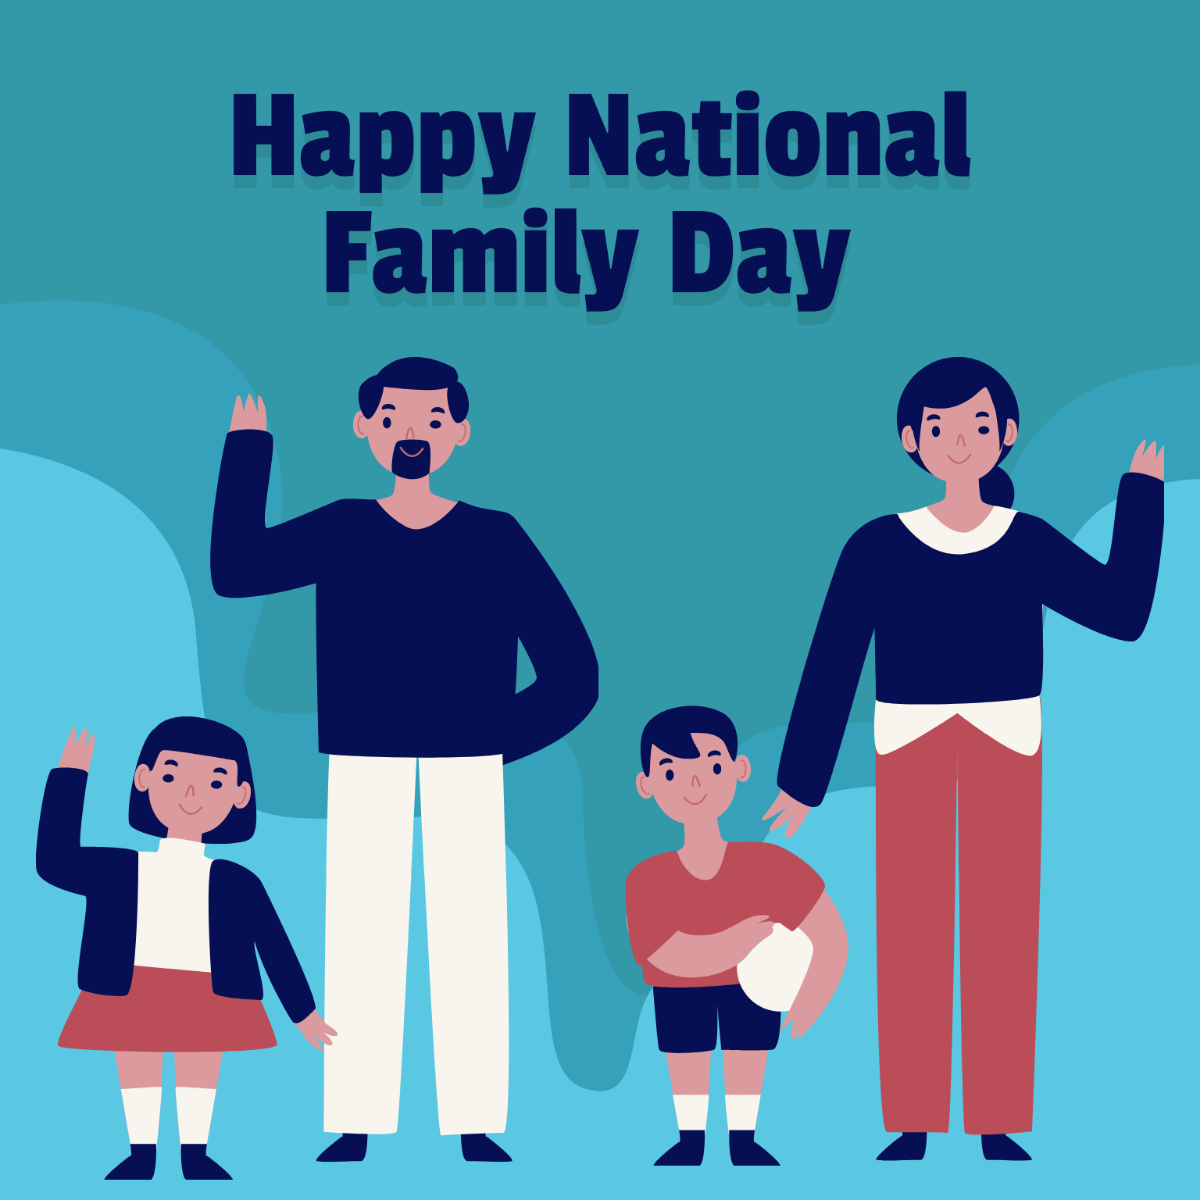 Happy National Family Day Illustration Template